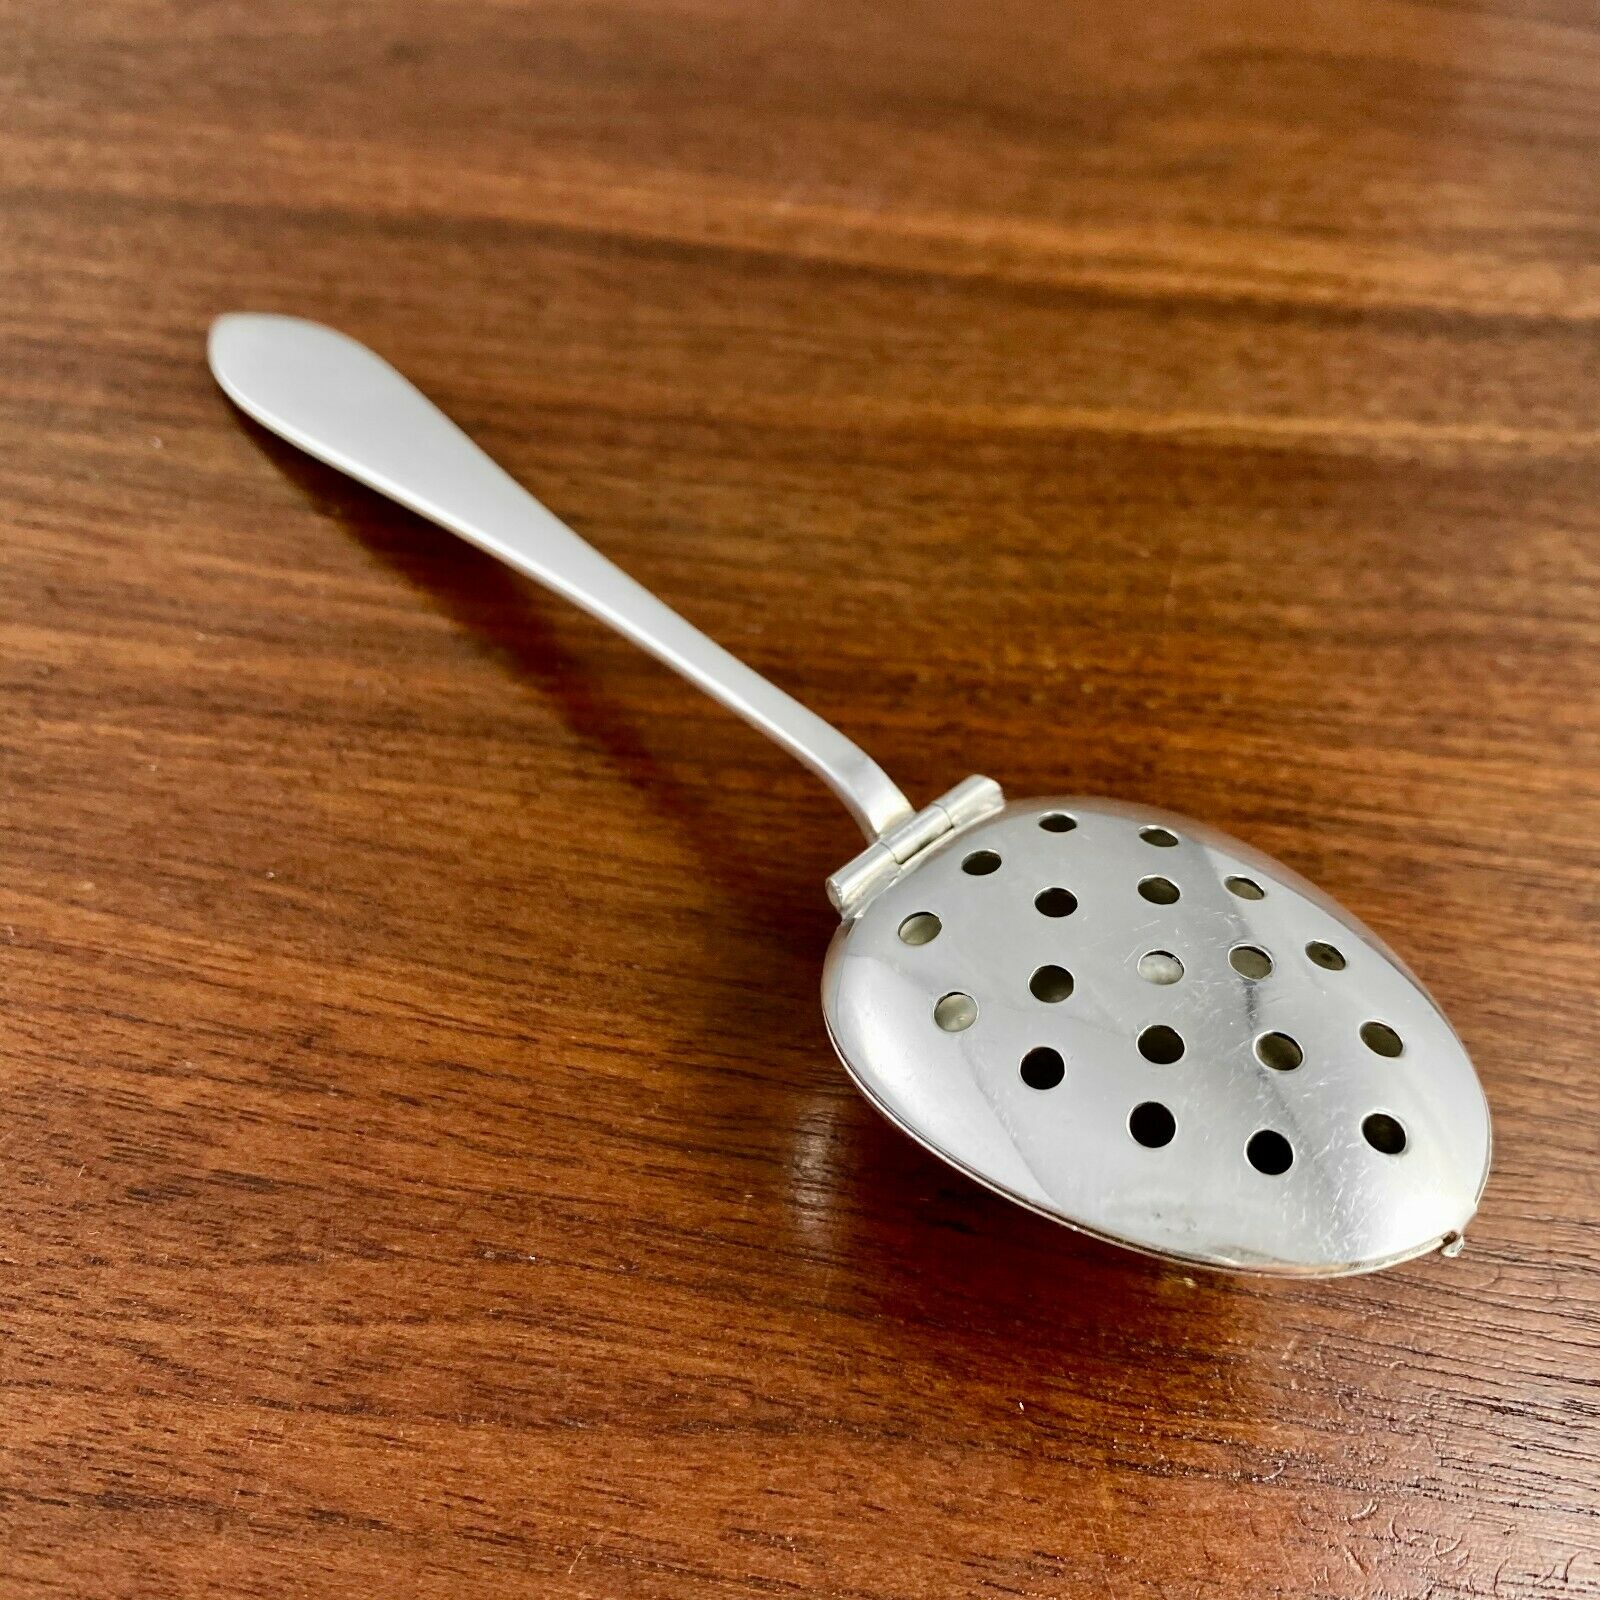 Webster Sterling Silver Tea Infuser Spoon Pointed Antique Style - No Monogram